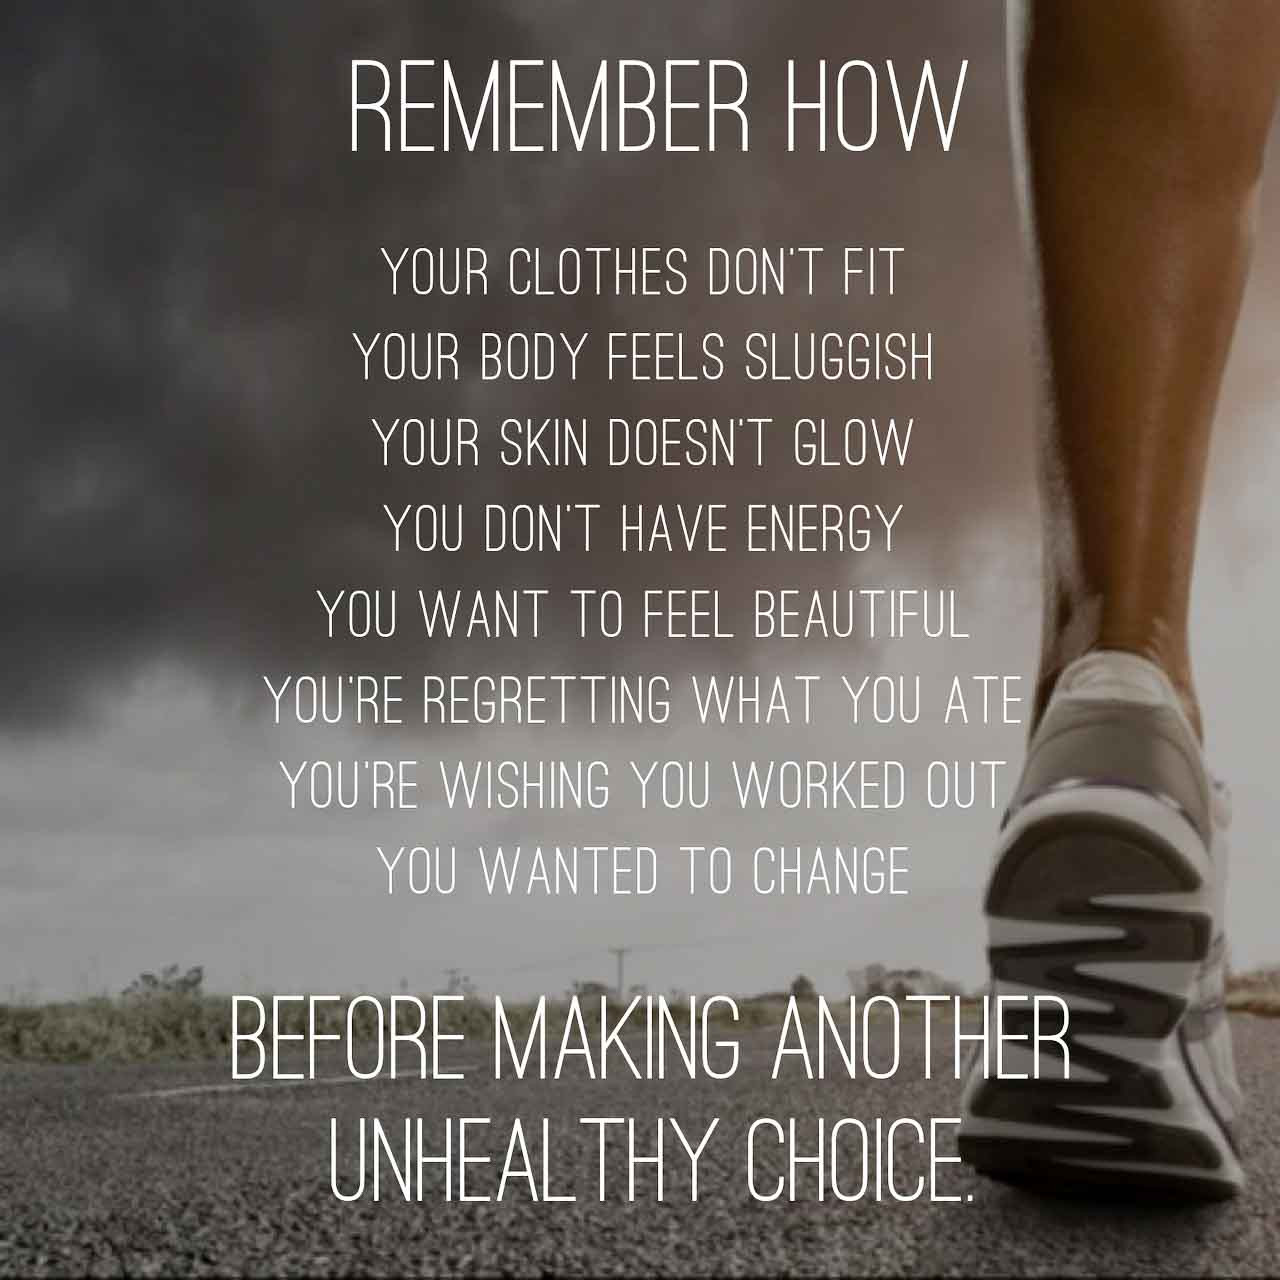 Workout Inspirational Quotes
 Get inspired with these motivational workout quotes